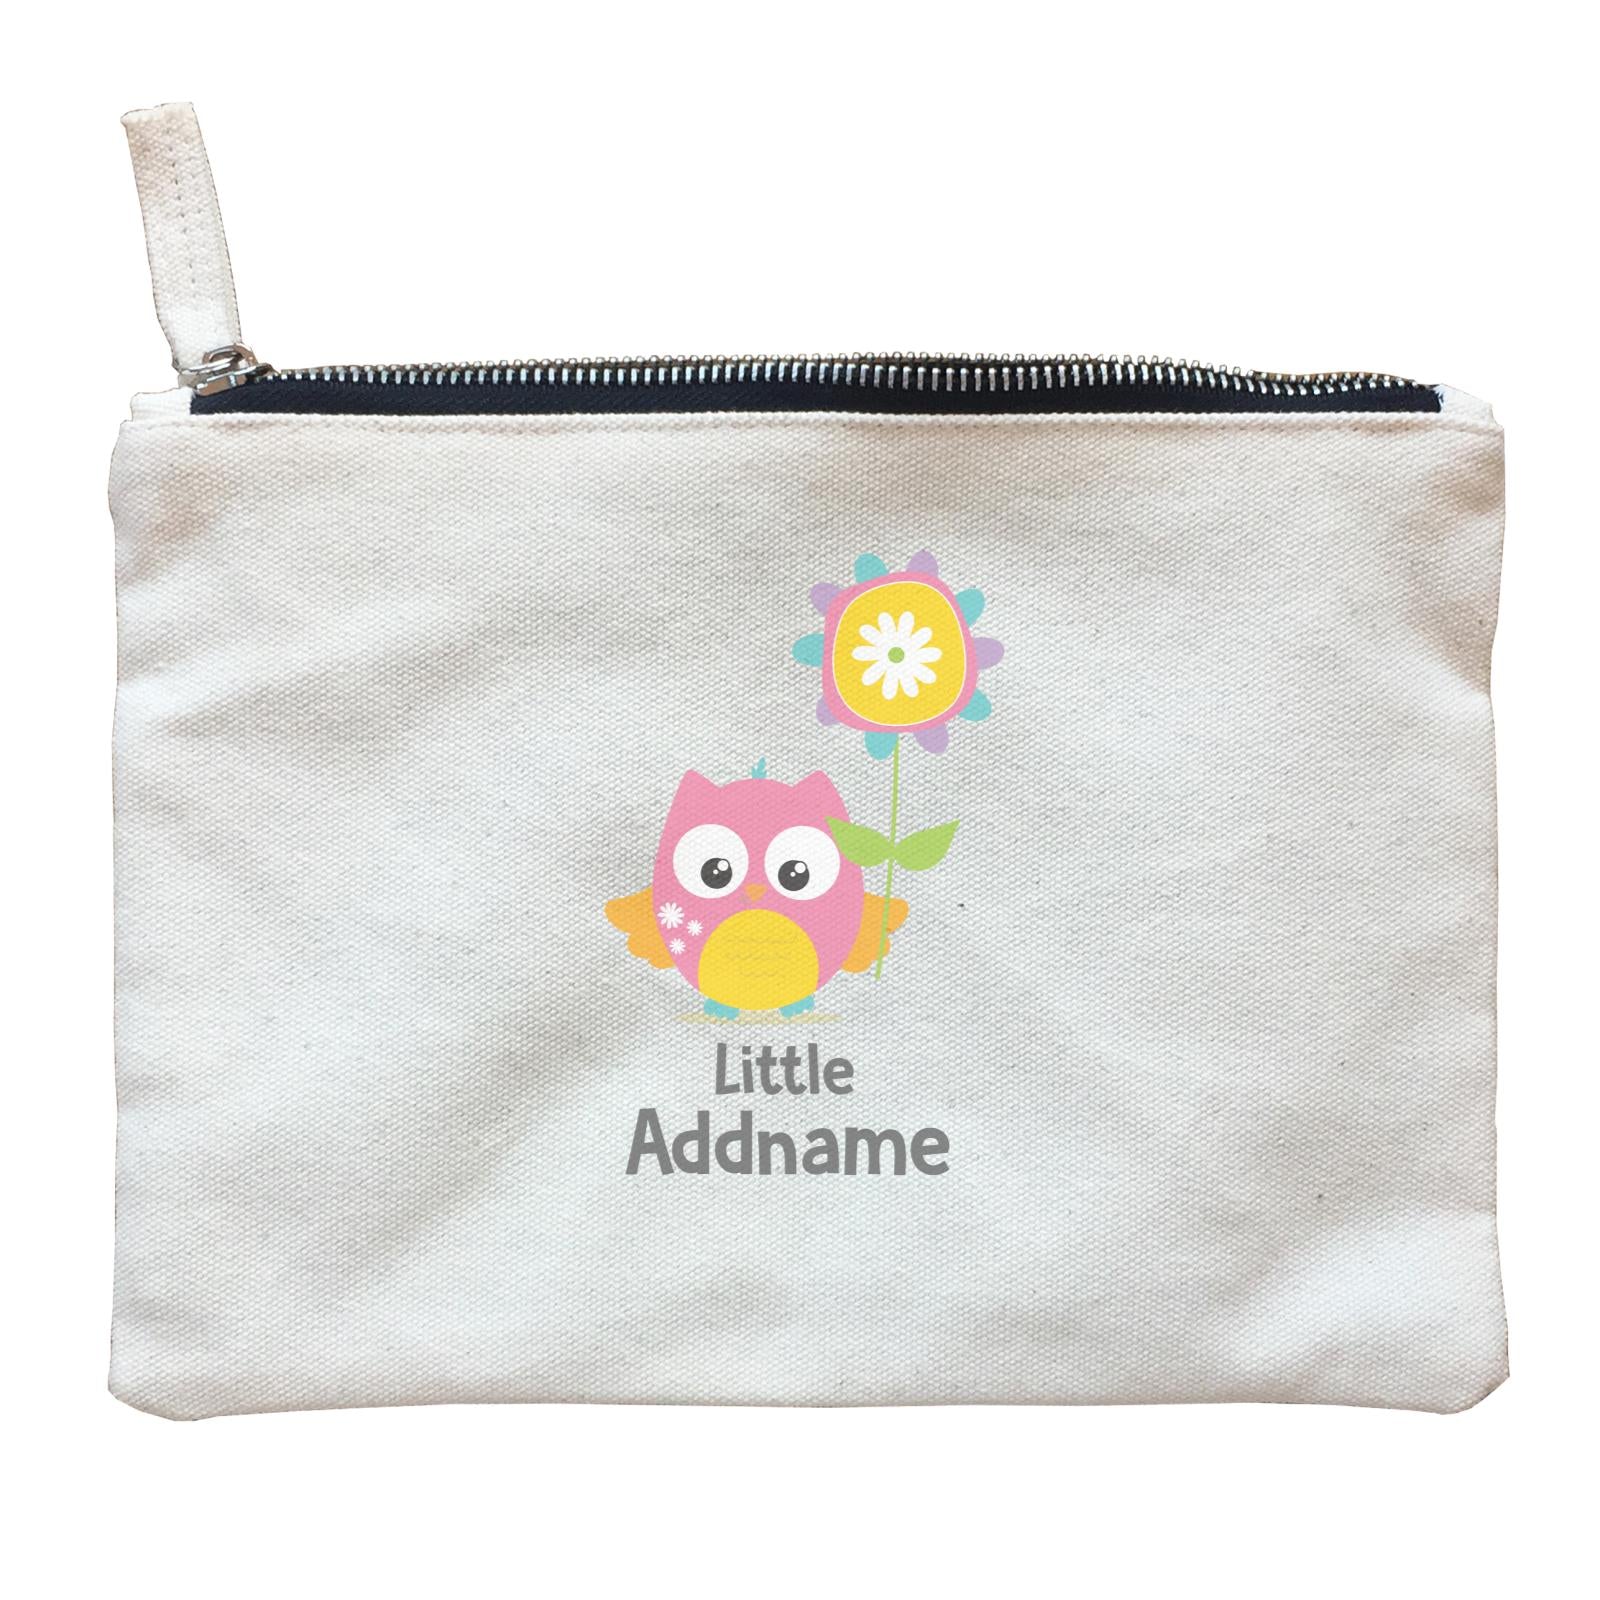 Cute Owls Pink with Flower Little Addname Zipper Pouch